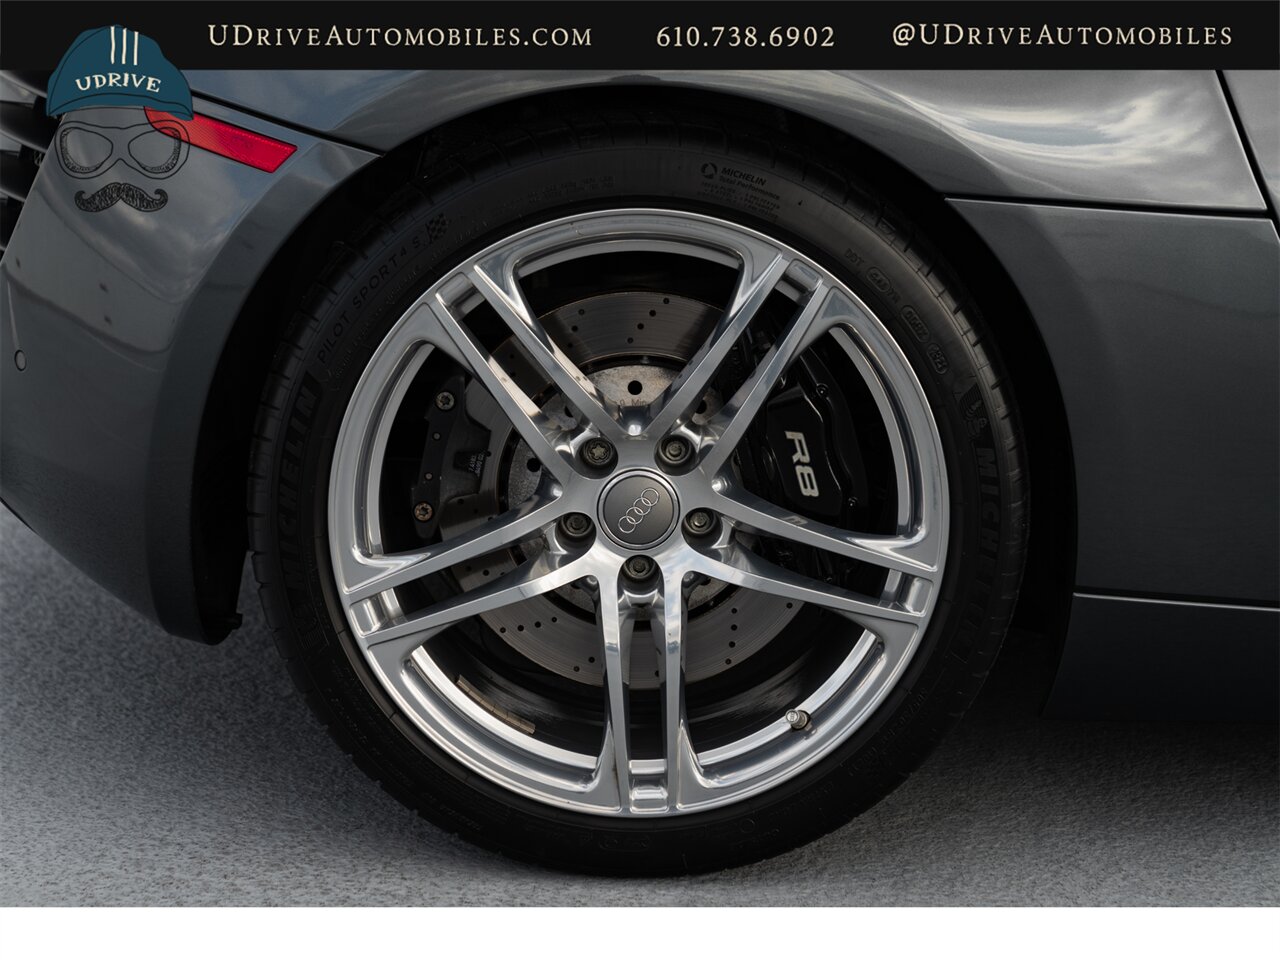 2009 Audi R8 Quattro  4.2 V8 6 Speed Manual 15k Miles - Photo 52 - West Chester, PA 19382